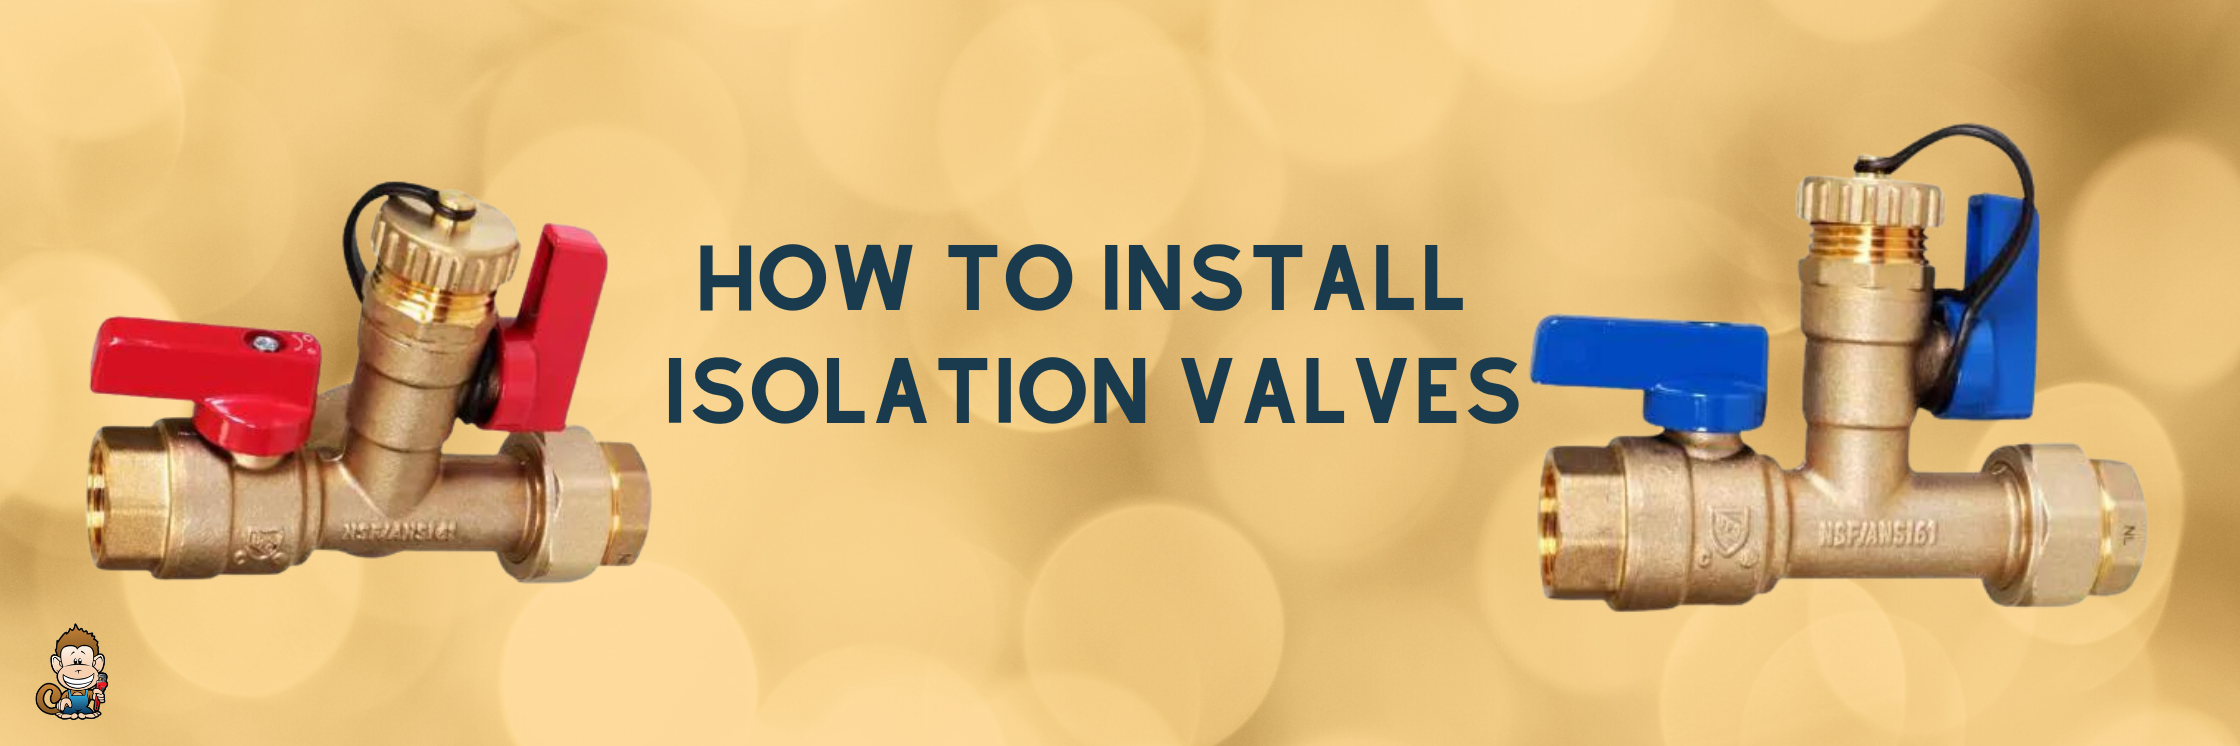 How to Install Isolation Valves